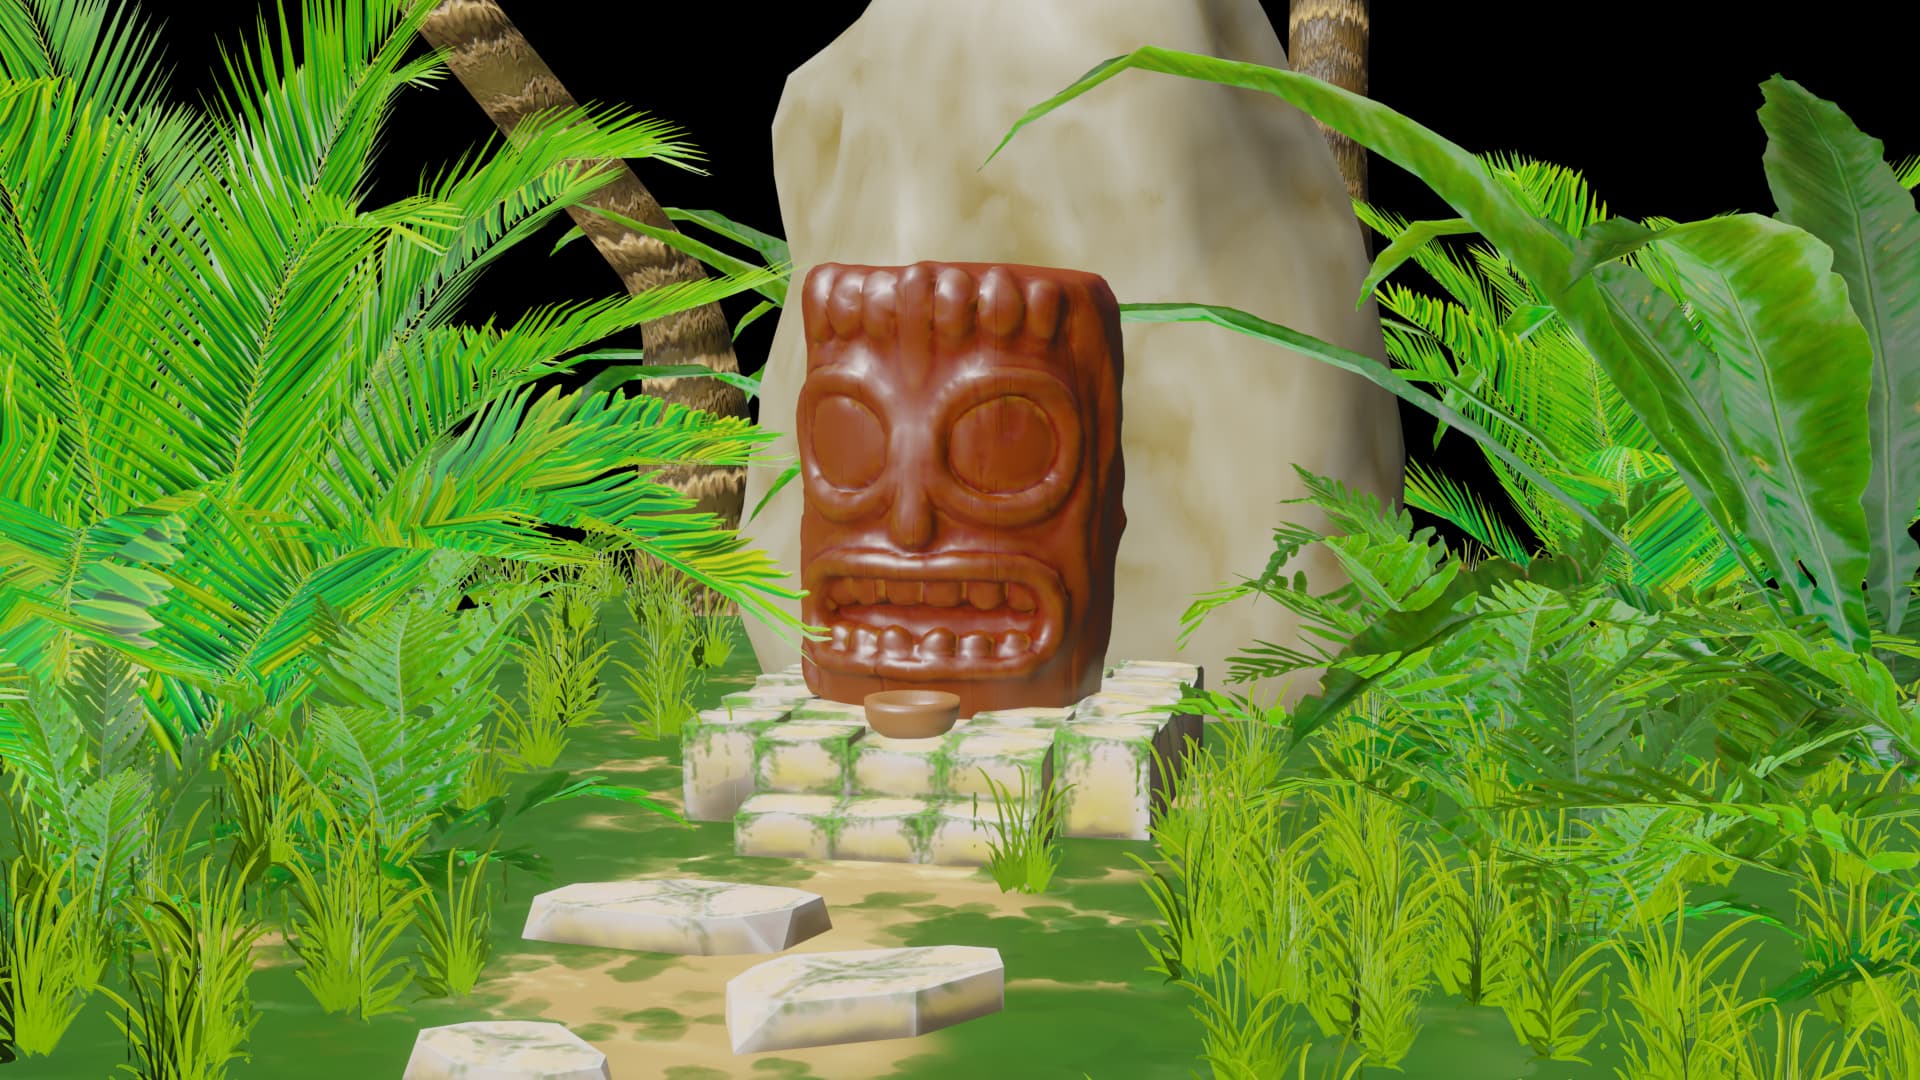 A tiki diorama - Finished Projects - Blender Artists Community